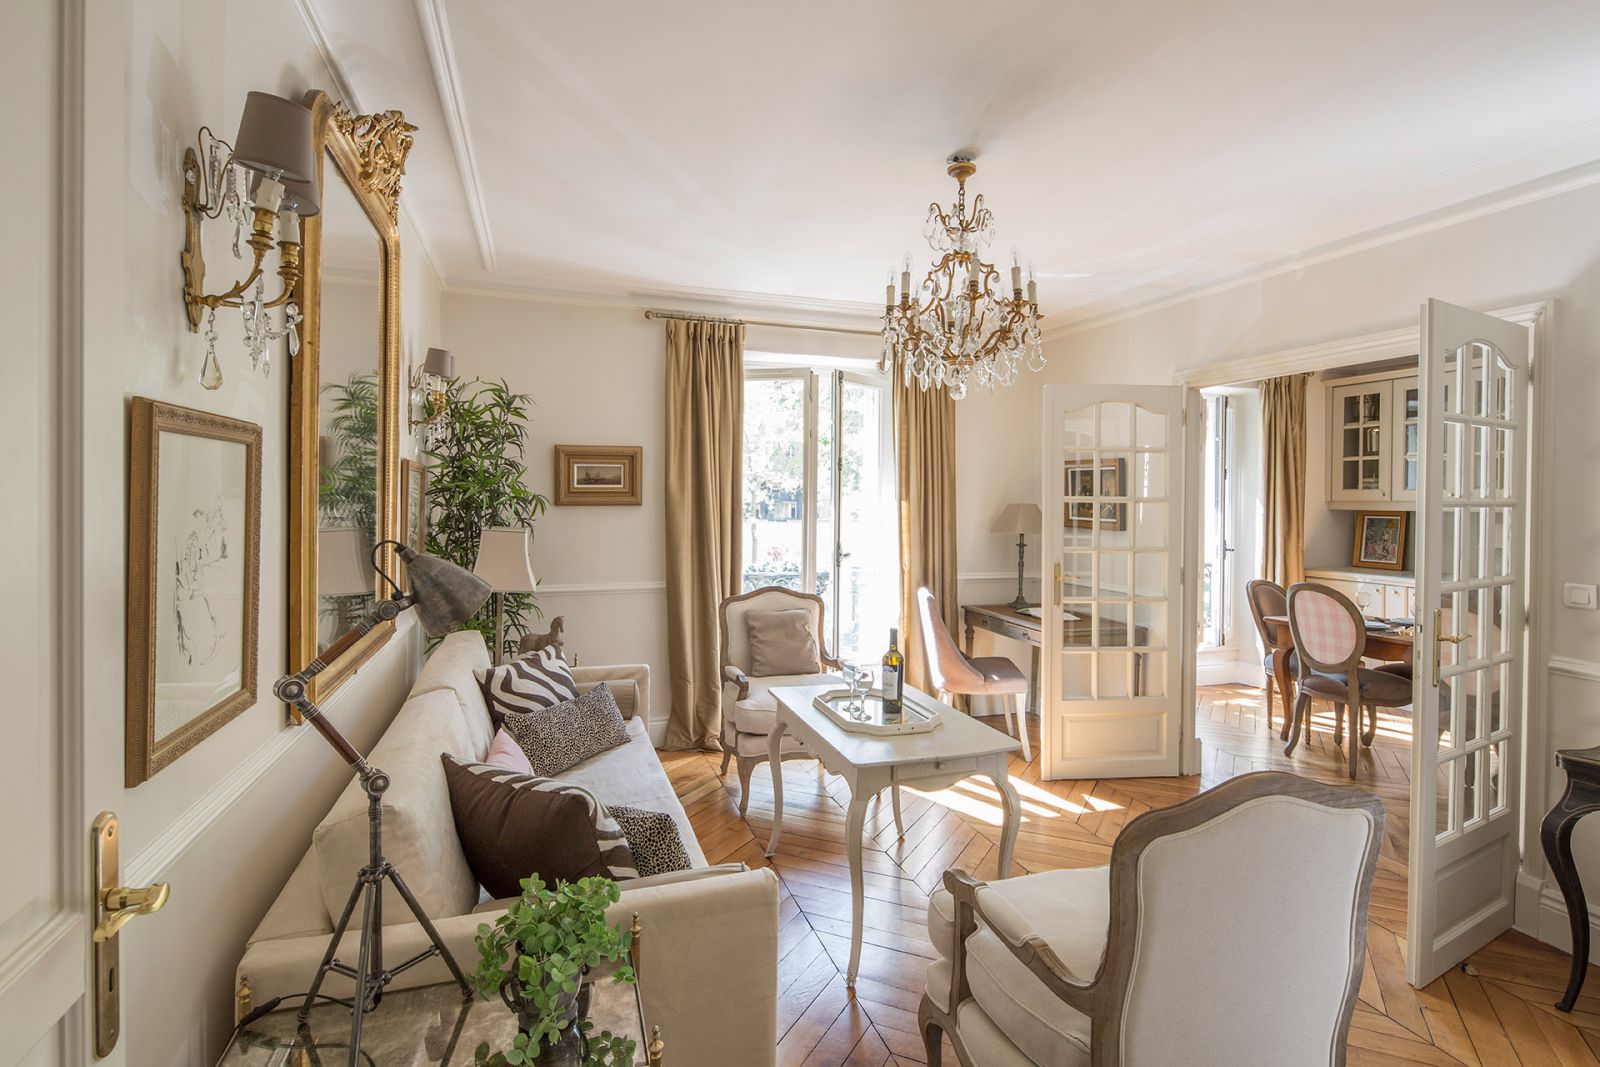 Welcome to our beautiful Beaune rental in Paris.